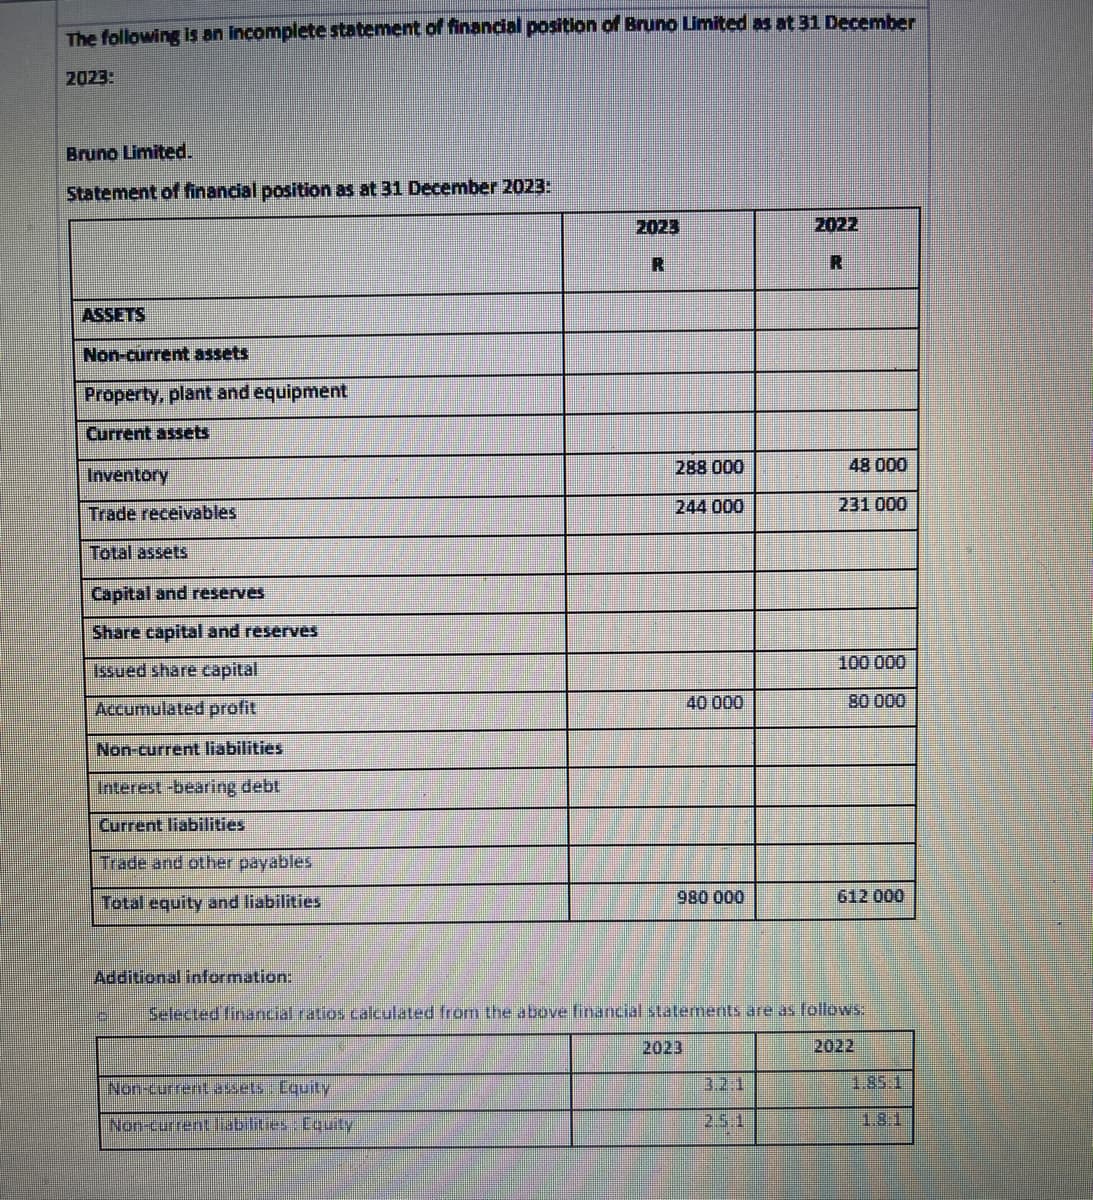 The following is an incomplete statement of financial position of Bruno Limited as at 31 December
2023:
Bruno Limited.
Statement of financial position as at 31 December 2023:
ASSETS
Non-current assets
Property, plant and equipment
Current assets
Inventory
Trade receivables
Total assets
Capital and reserves
Share capital and reserves
Issued share capital
Accumulated profit
Non-current liabilities
Interest -bearing debt
Current liabilities
Trade and other payables
Total equity and liabilities
2023
R
Non-current assets. Equity
Non-current liabilities: Equity
288 000
244 000
40 000
980 000
2023
2022
R
48 000
231 000
100 000
80 000
Additional information:
Selected financial ratios calculated from the above financial statements are as follows:
2022
612 000
1.85:1
1.8.1